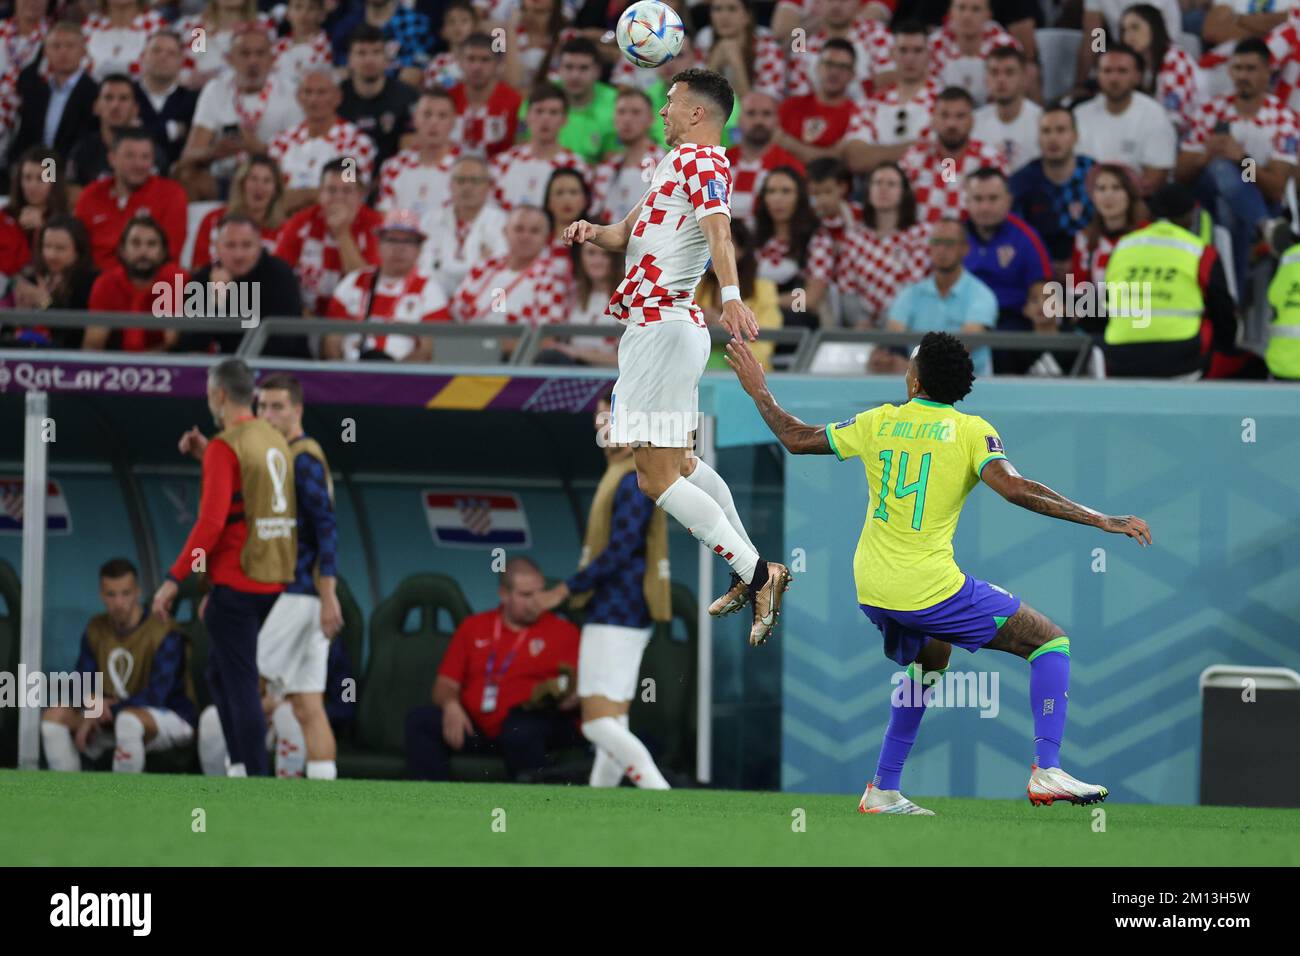 Doha, Qatar. 09th Dec, 2022. Ivan Perišić Croatia player during a match against Brazil valid for the quarterfinals of the FIFA World Cup in Qatar at Education City Stadium in Doha, Qatar. December 9, 2022 Photo:William Volcov Credit: Brazil Photo Press/Alamy Live News Stock Photo